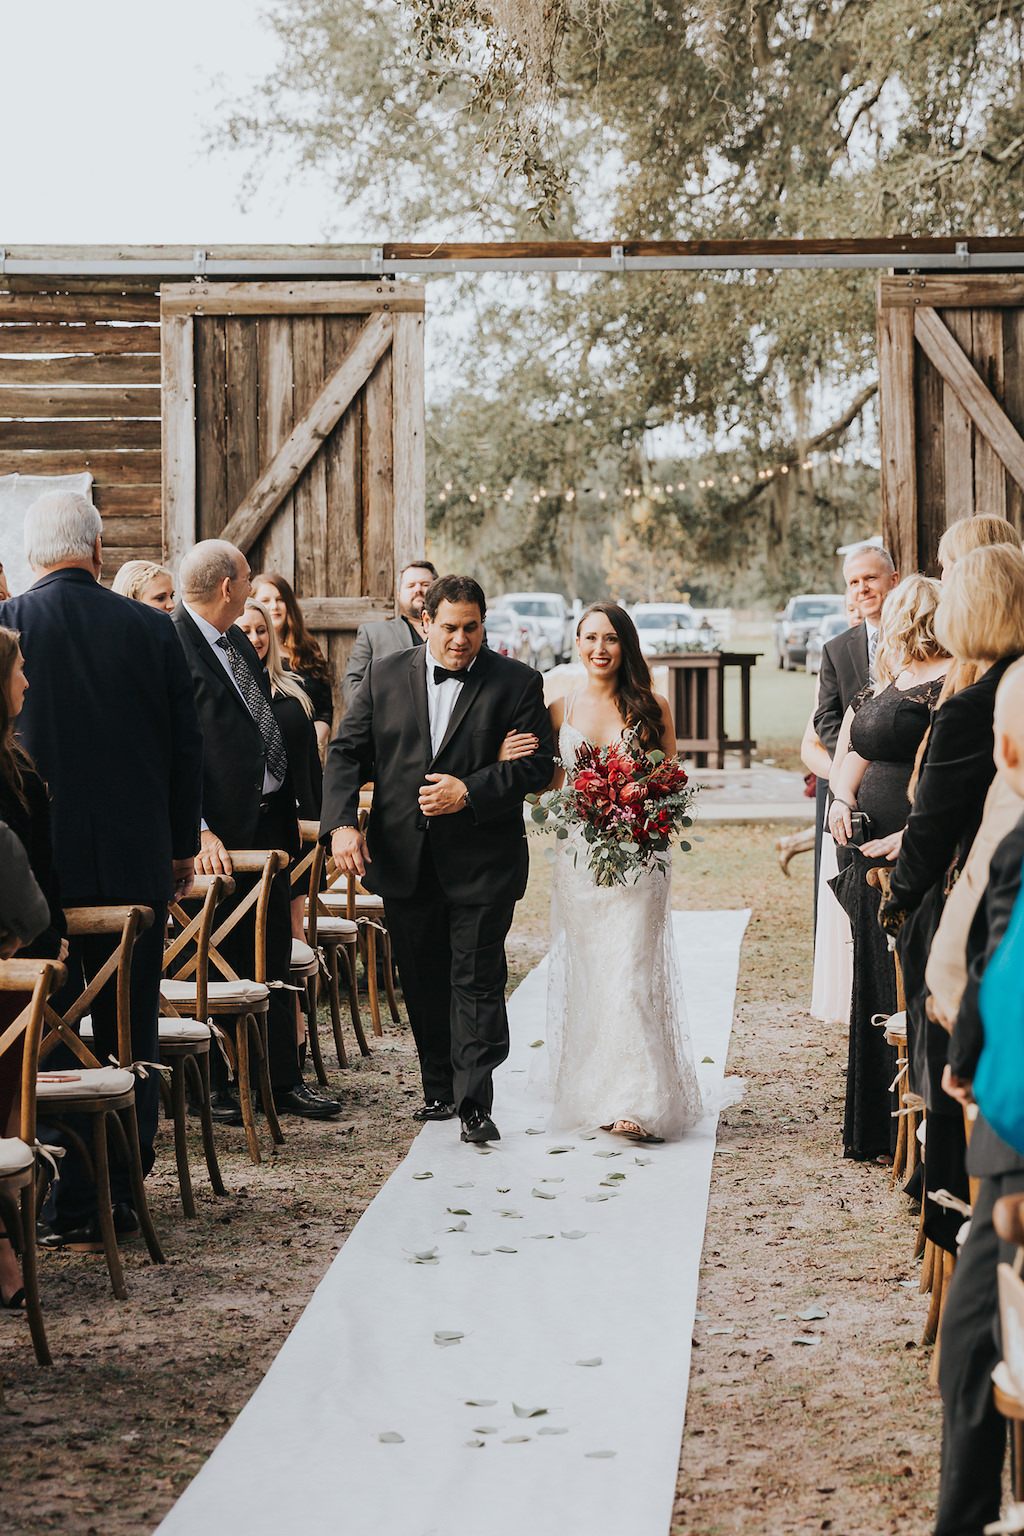 Bride and Father of the Bride Wedding Processional, Walking Down the Aisle, White Runner, Oversized Large Wooden Barn Doors, Red and Pink Floral Wedding Bouquet, Rustic Florida Farm Venue